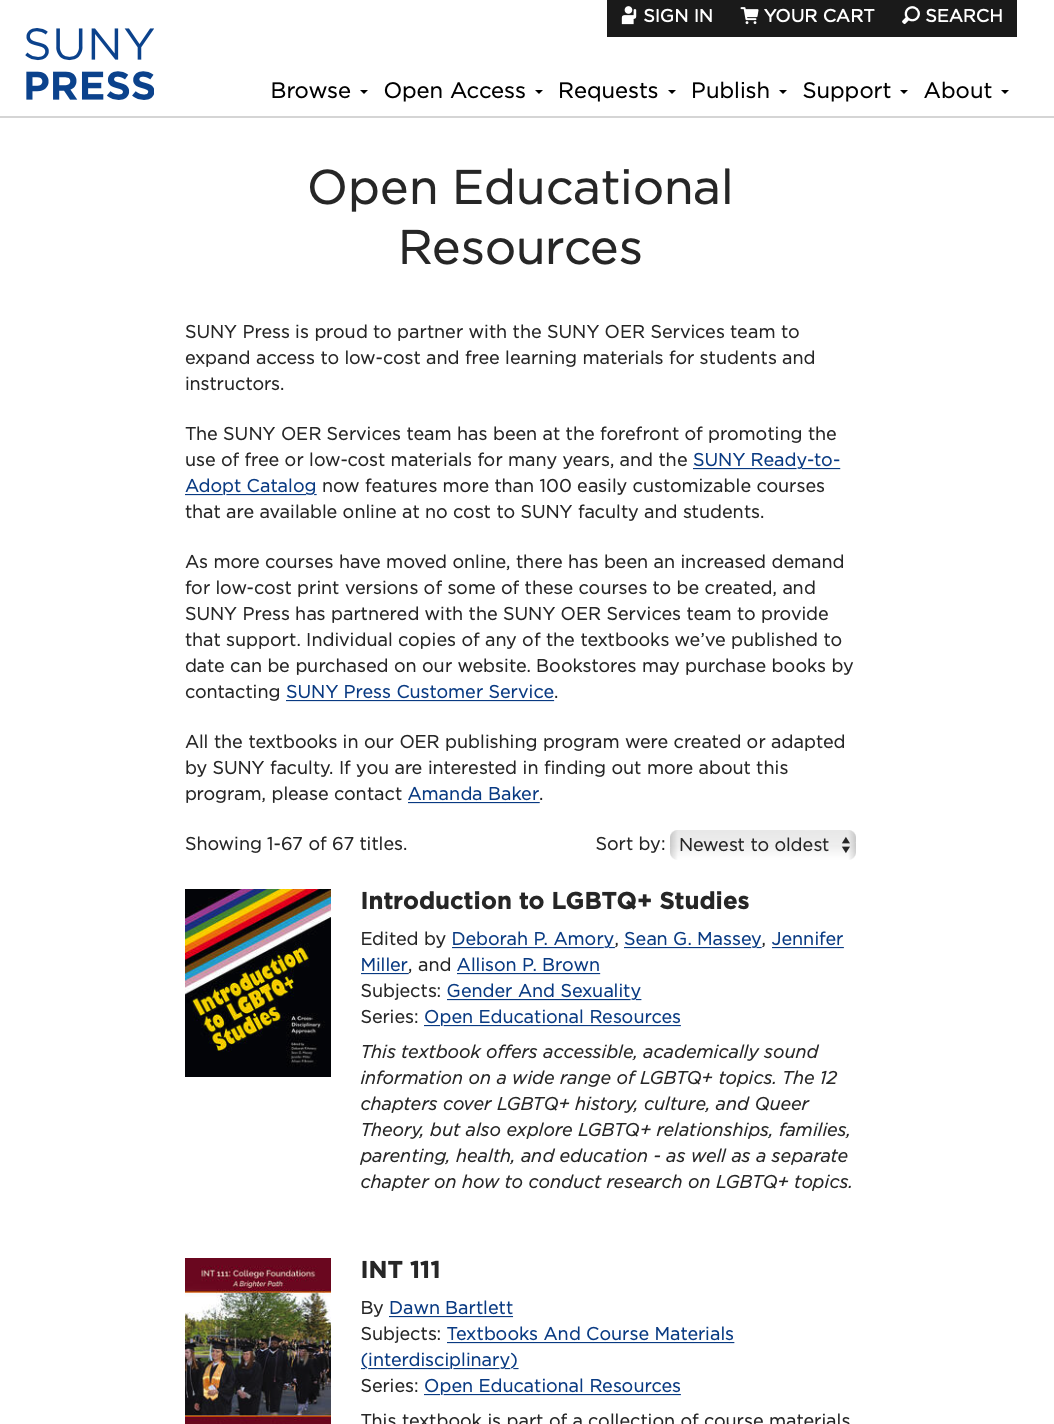 Screenshot of open educational resources from SUNY Press